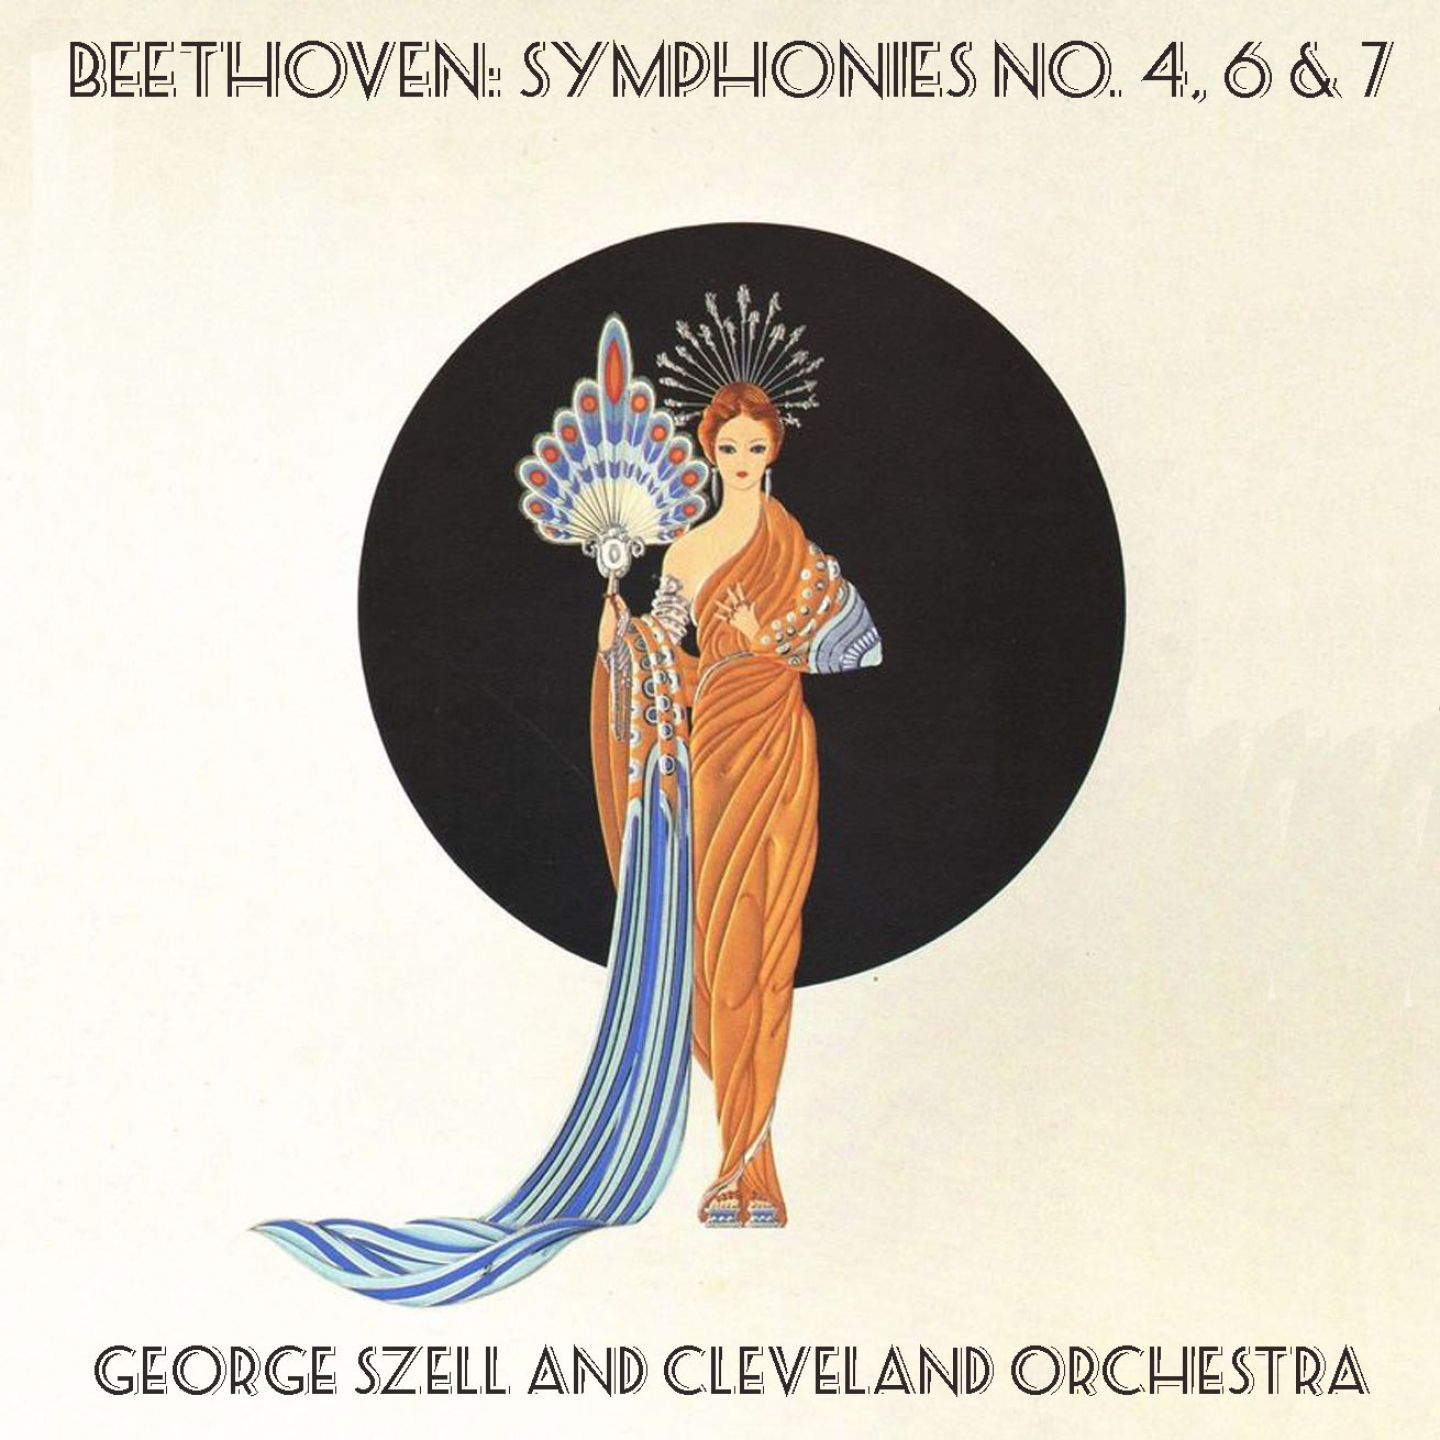 Beethoven: Symphonies No. 4, 6 & 7 / George Szell and Cleveland Orchestra